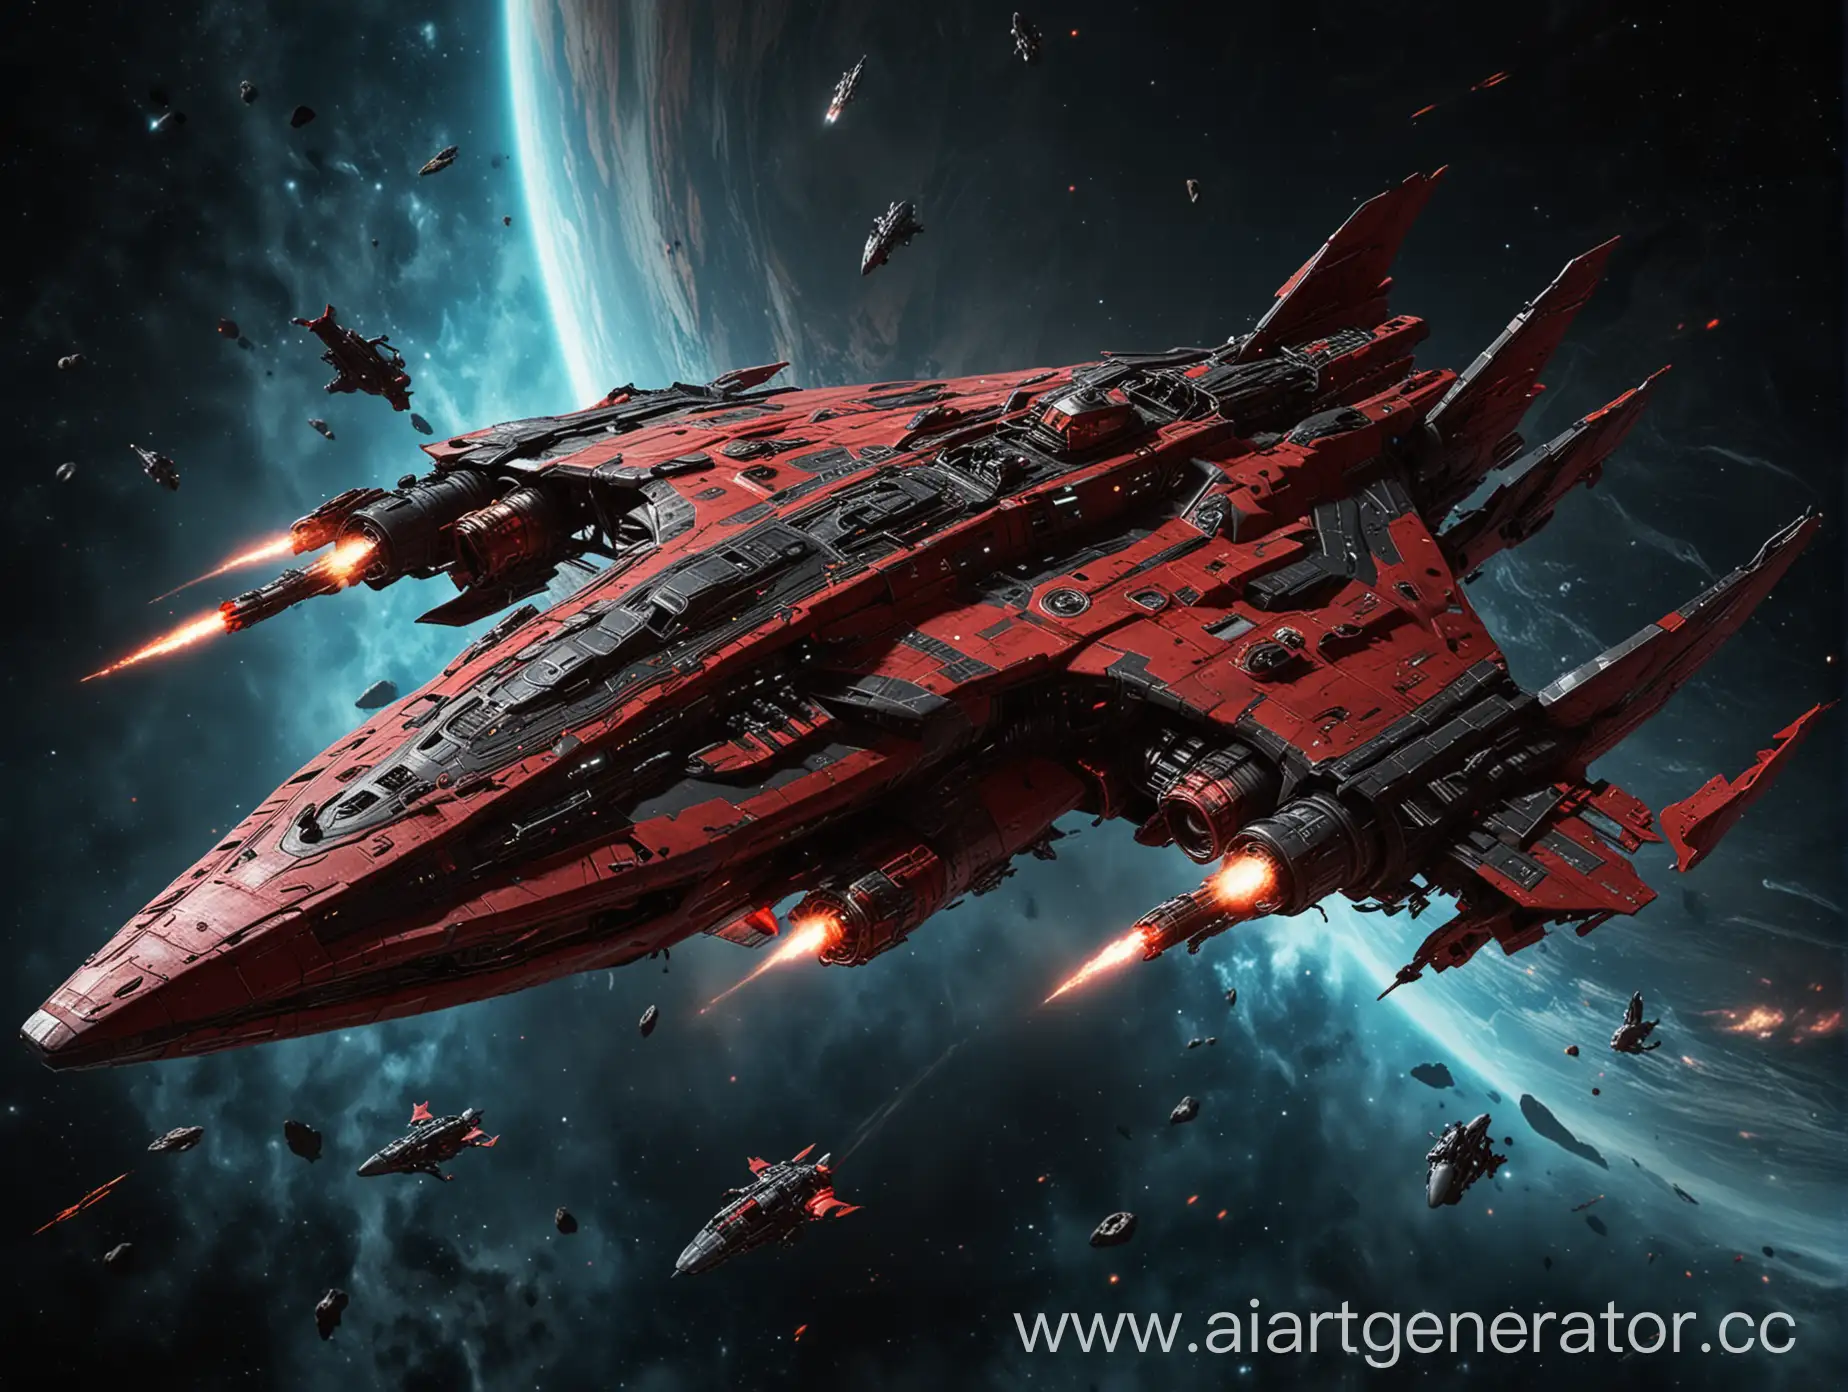 A large spaceship of the alien race of the main boss with weapons that can destroy an entire planet. View of the ship drifting in space. a view of a box with curved wings, a huge weapon from below. red and black with lights on the body